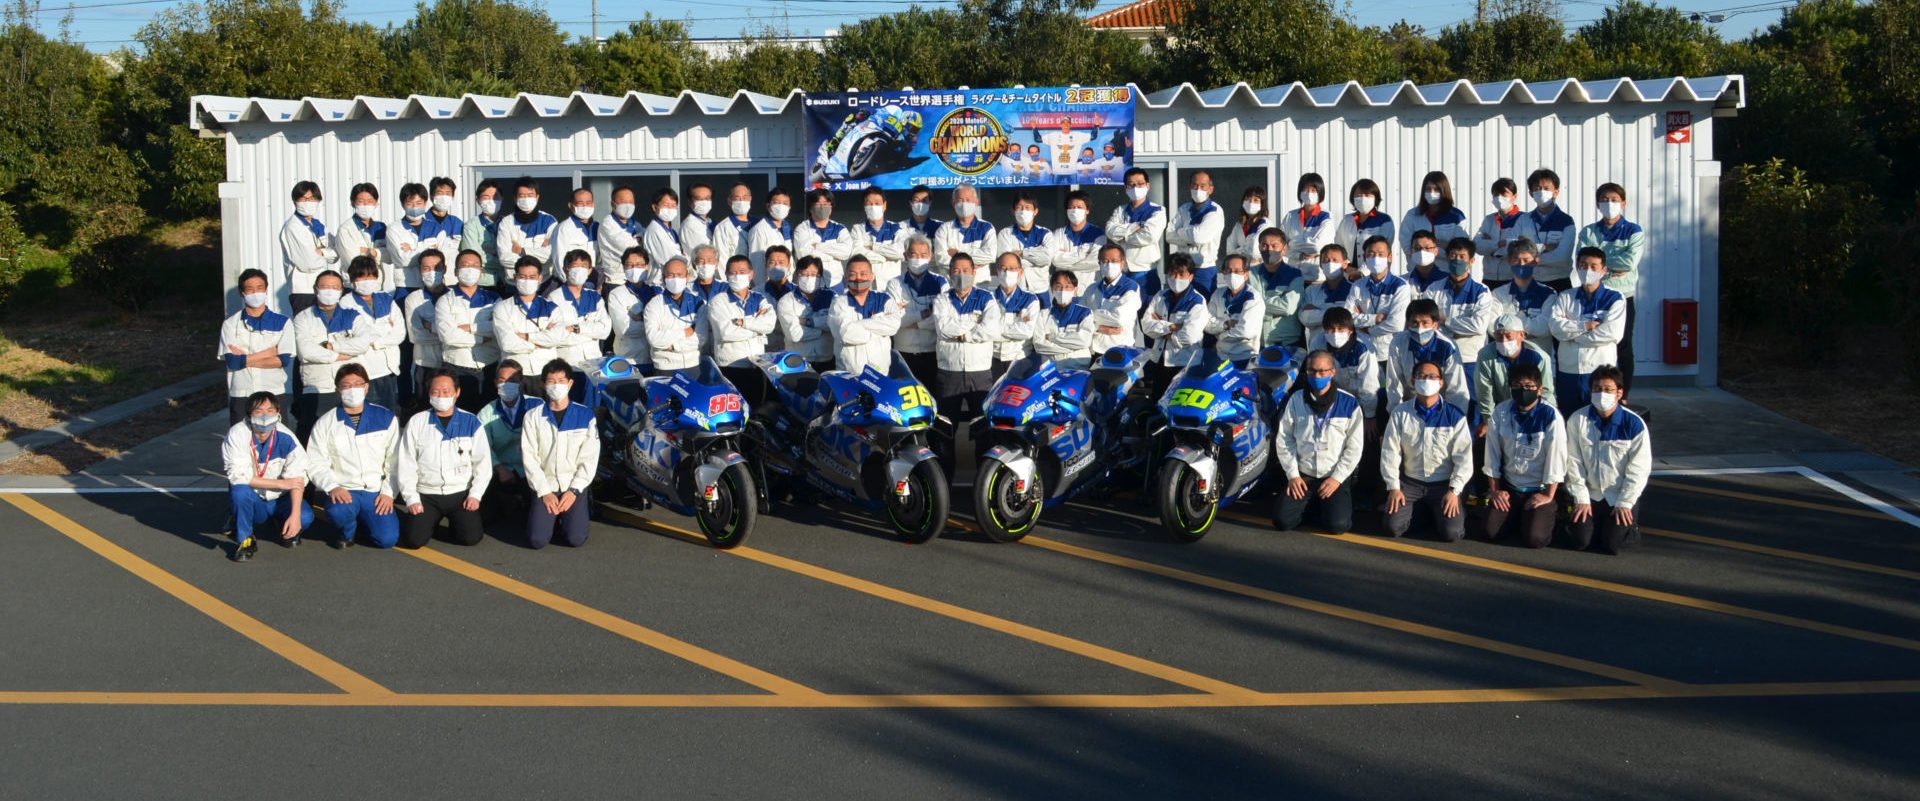 Suzuki's exceptional season was well worth a group photo, and at the seat what's more...